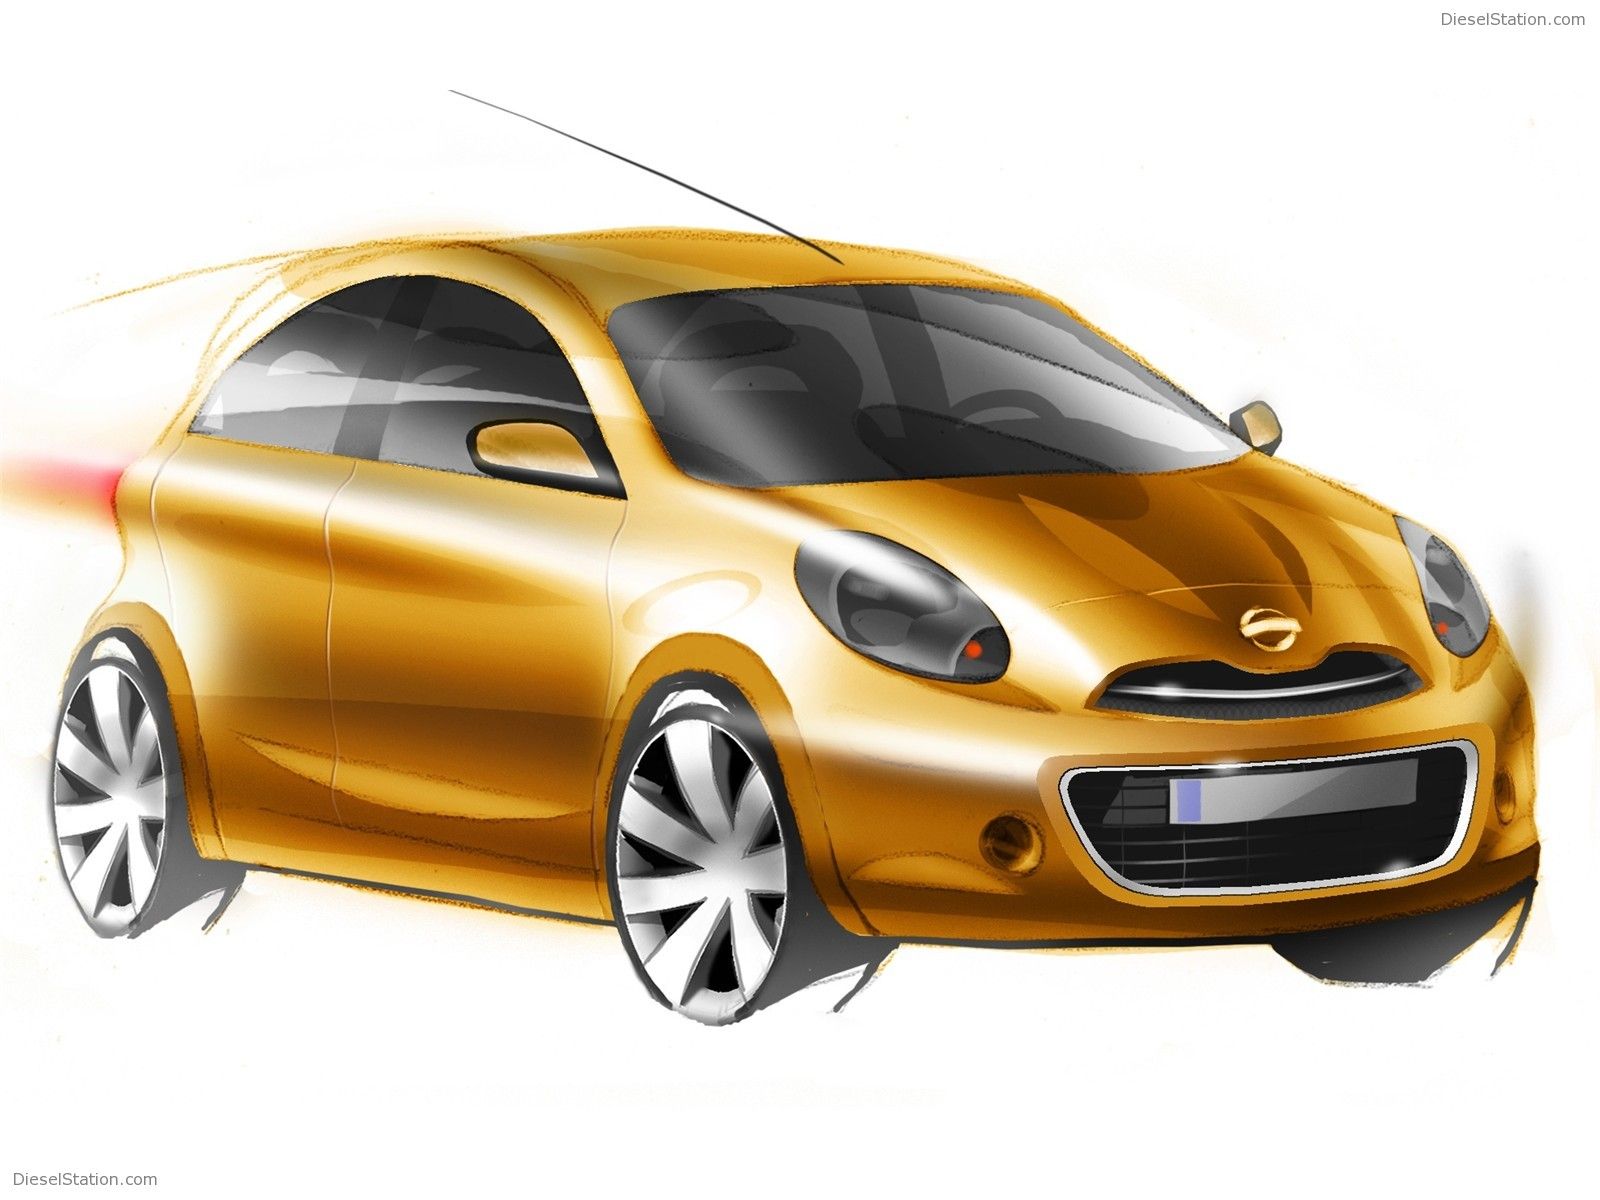 Nissan Compact Eco Car Sketch Exotic Car Wallpaper of 4, Diesel Station